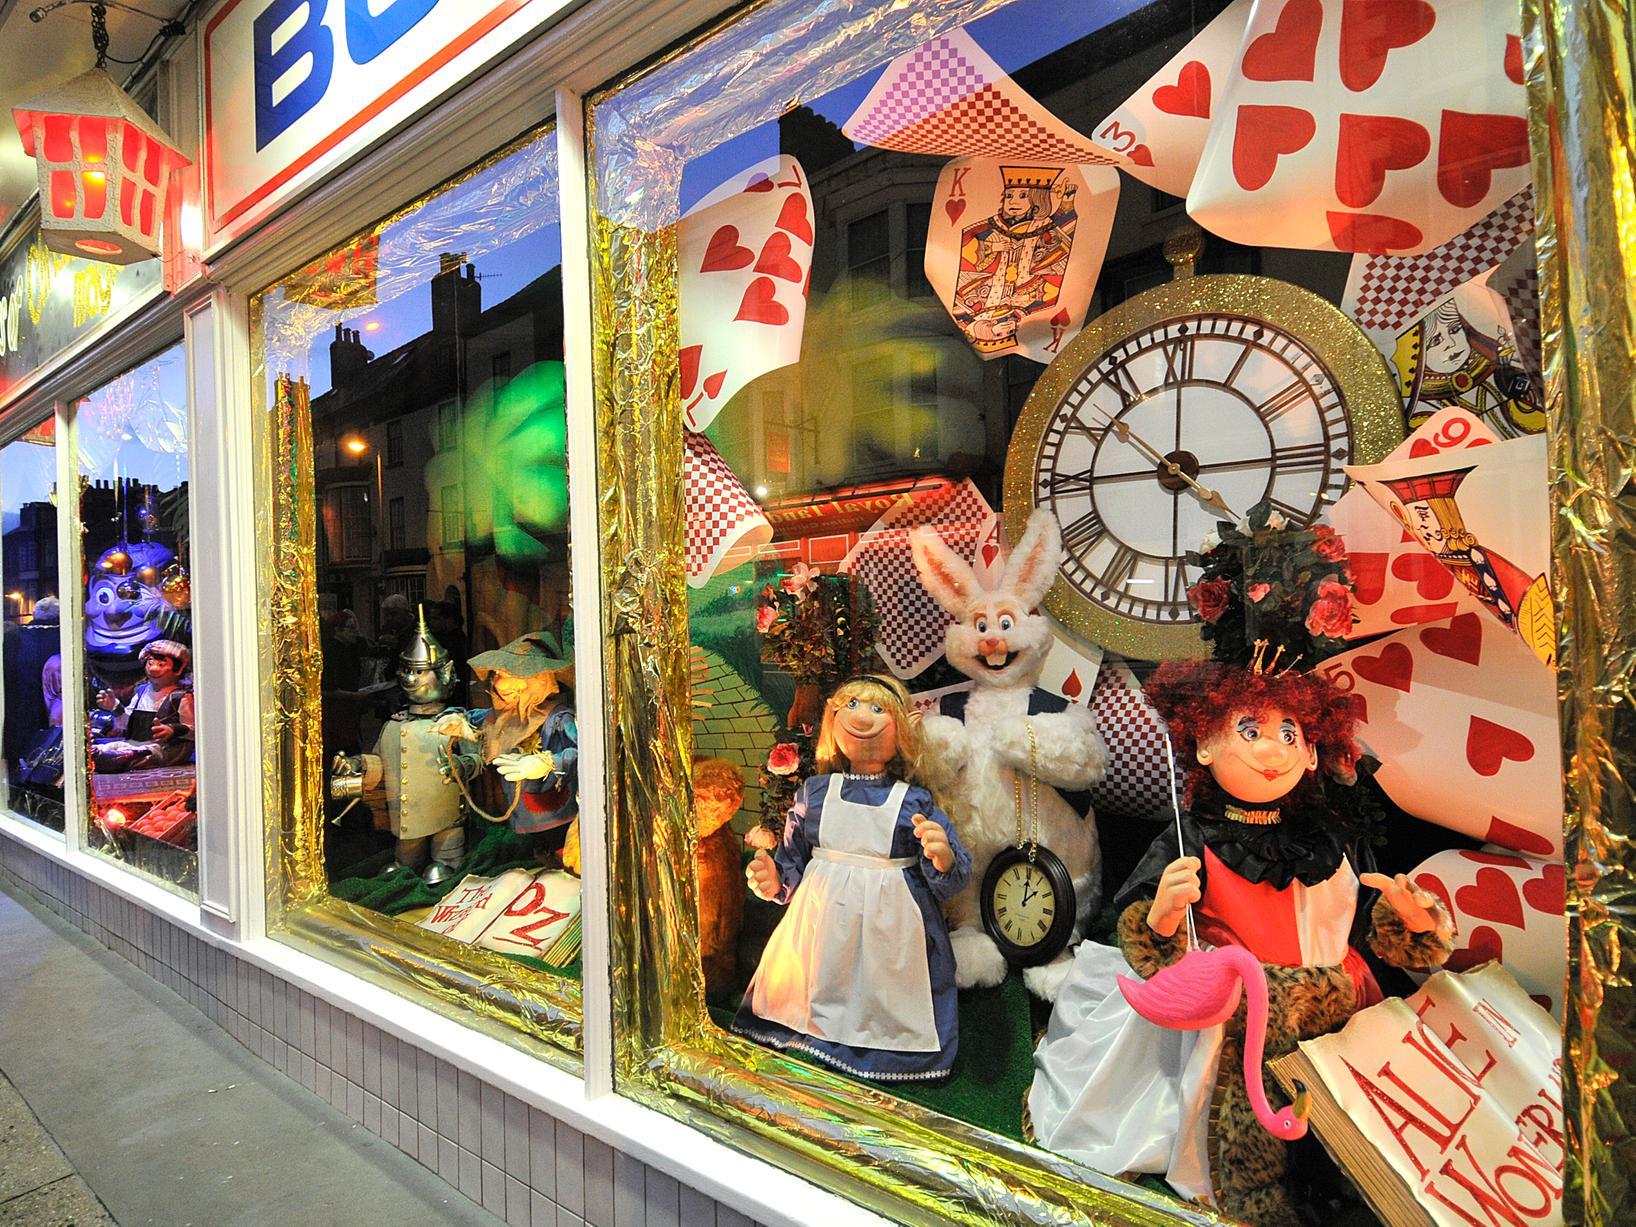 Characters from Alice in Wonderland and the Wizard of Oz filled the windows in 2016.